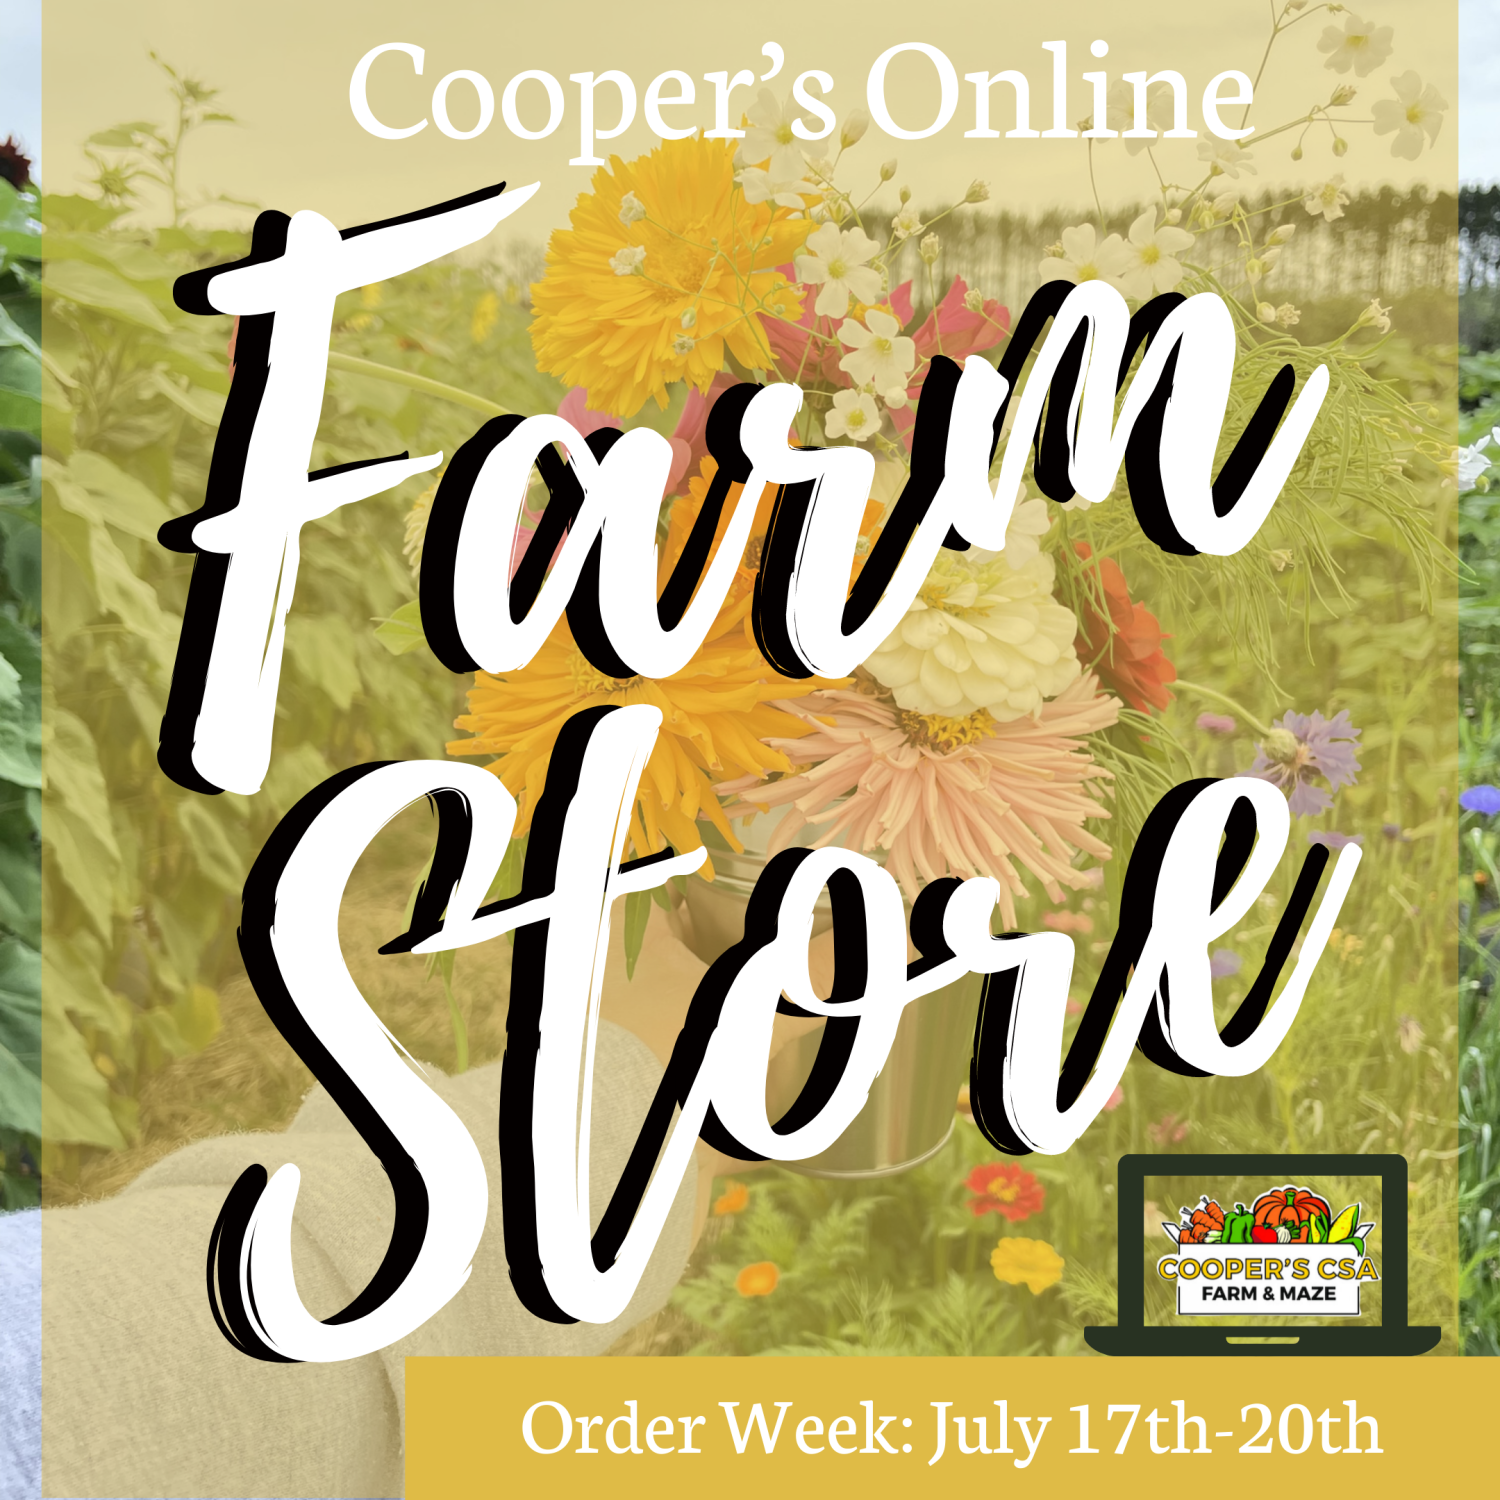 Previous Happening: Coopers CSA Online FarmStore- Order week July 17th-20th